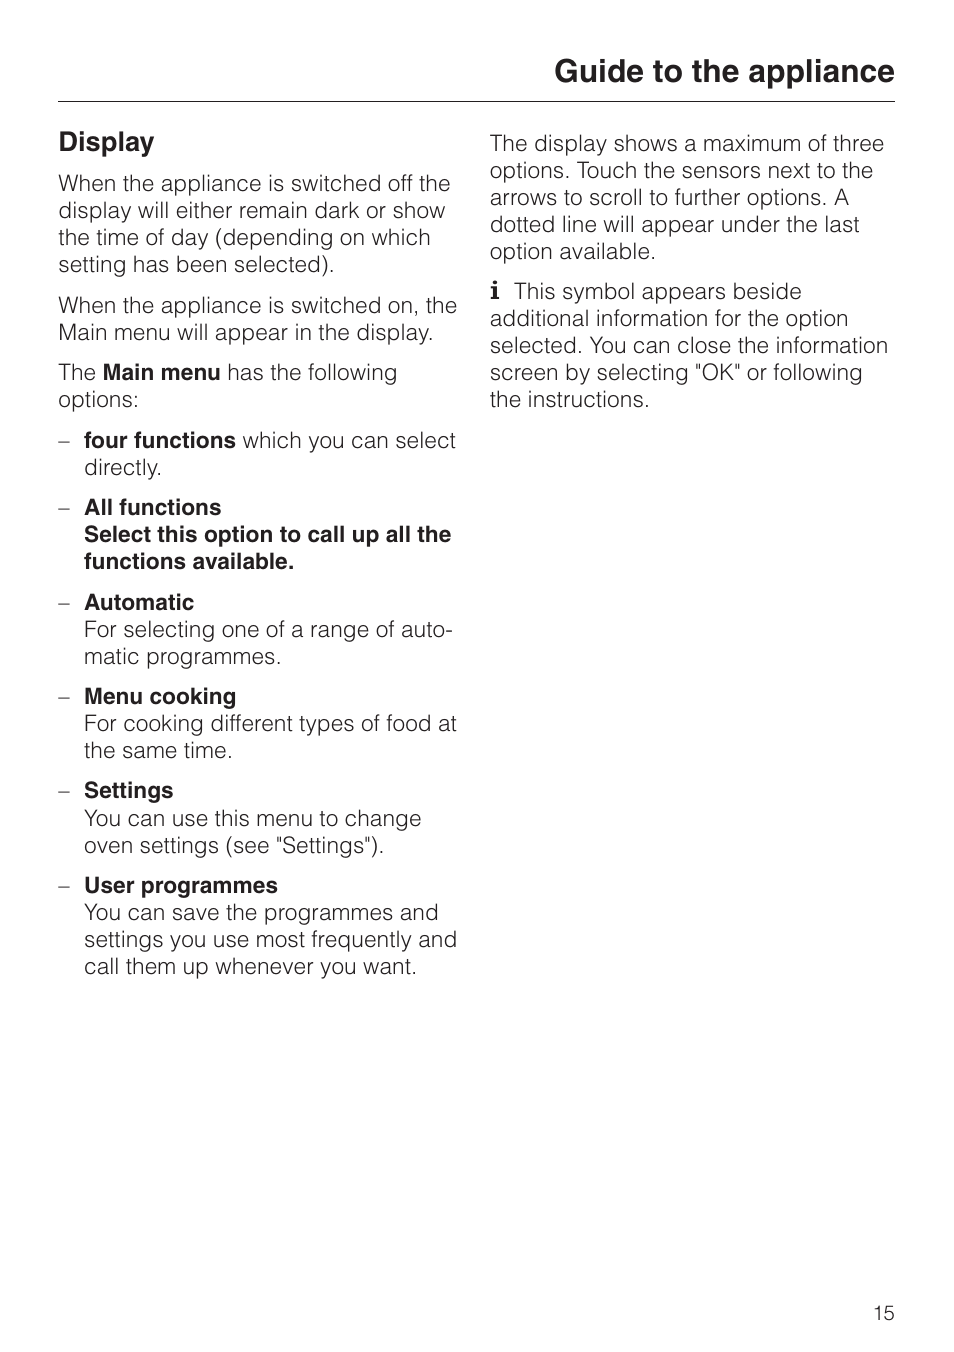 Display 15, Guide to the appliance, Display | Miele DG4080 User Manual |  Page 15 / 60 | Original mode